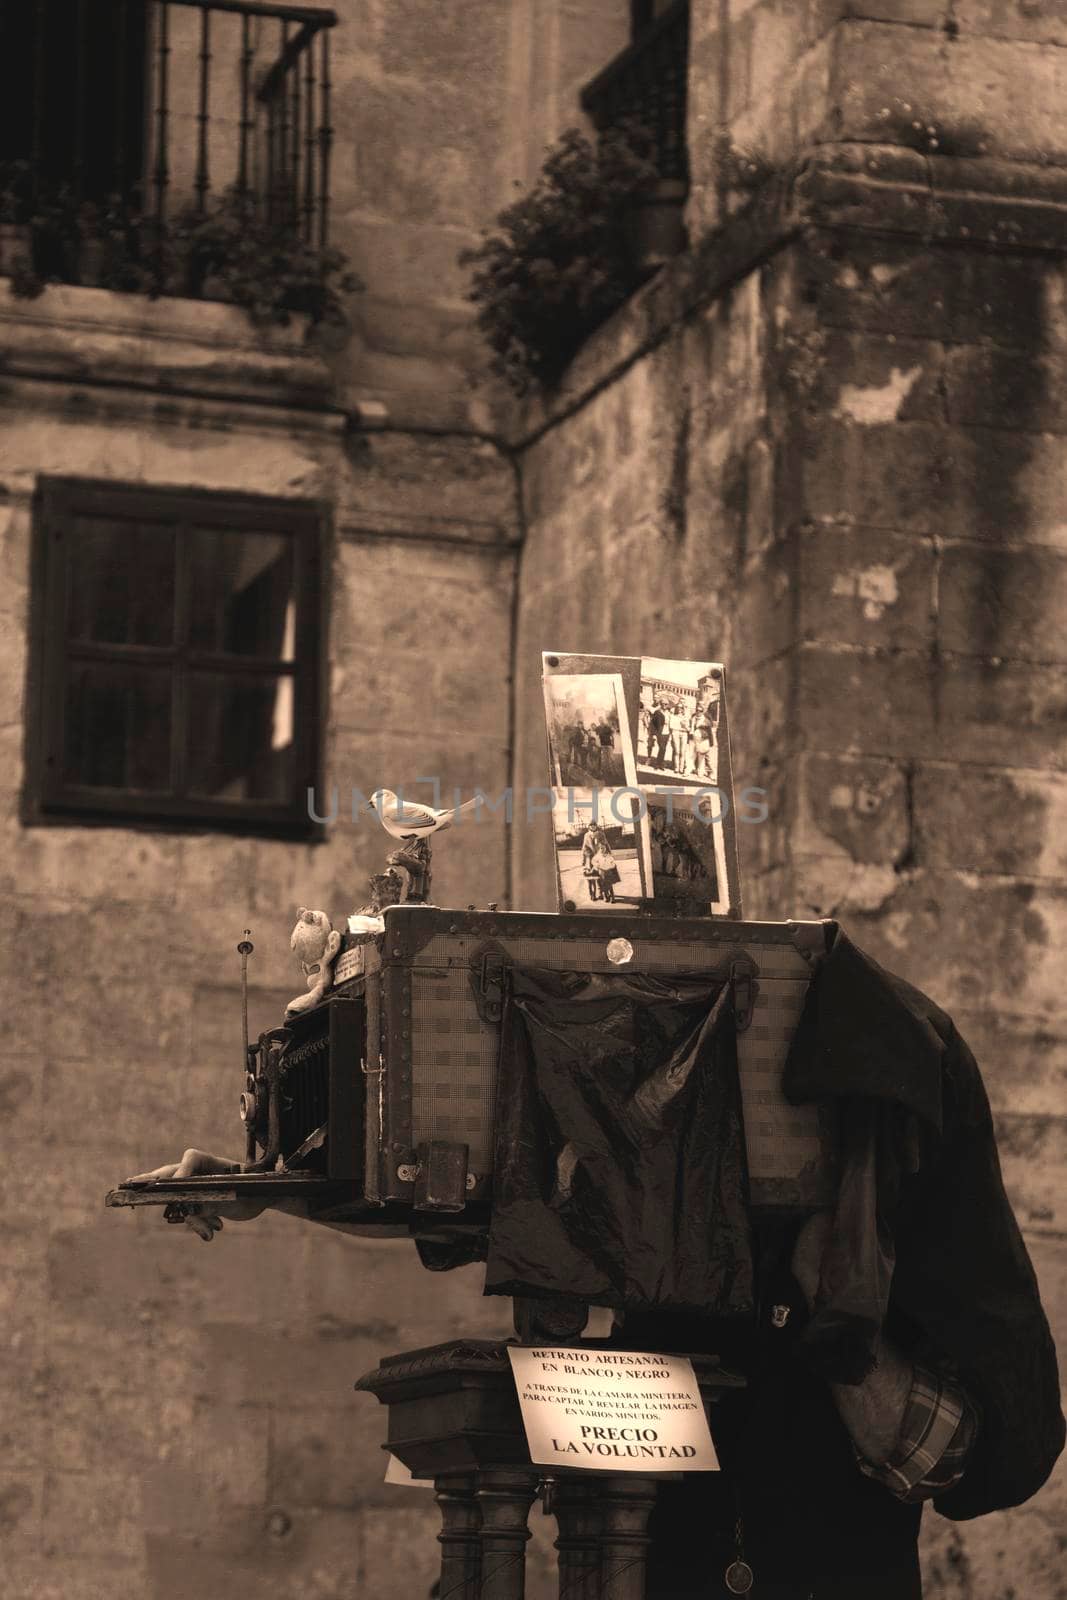 Photographer using an antique camera in an old town in black and white